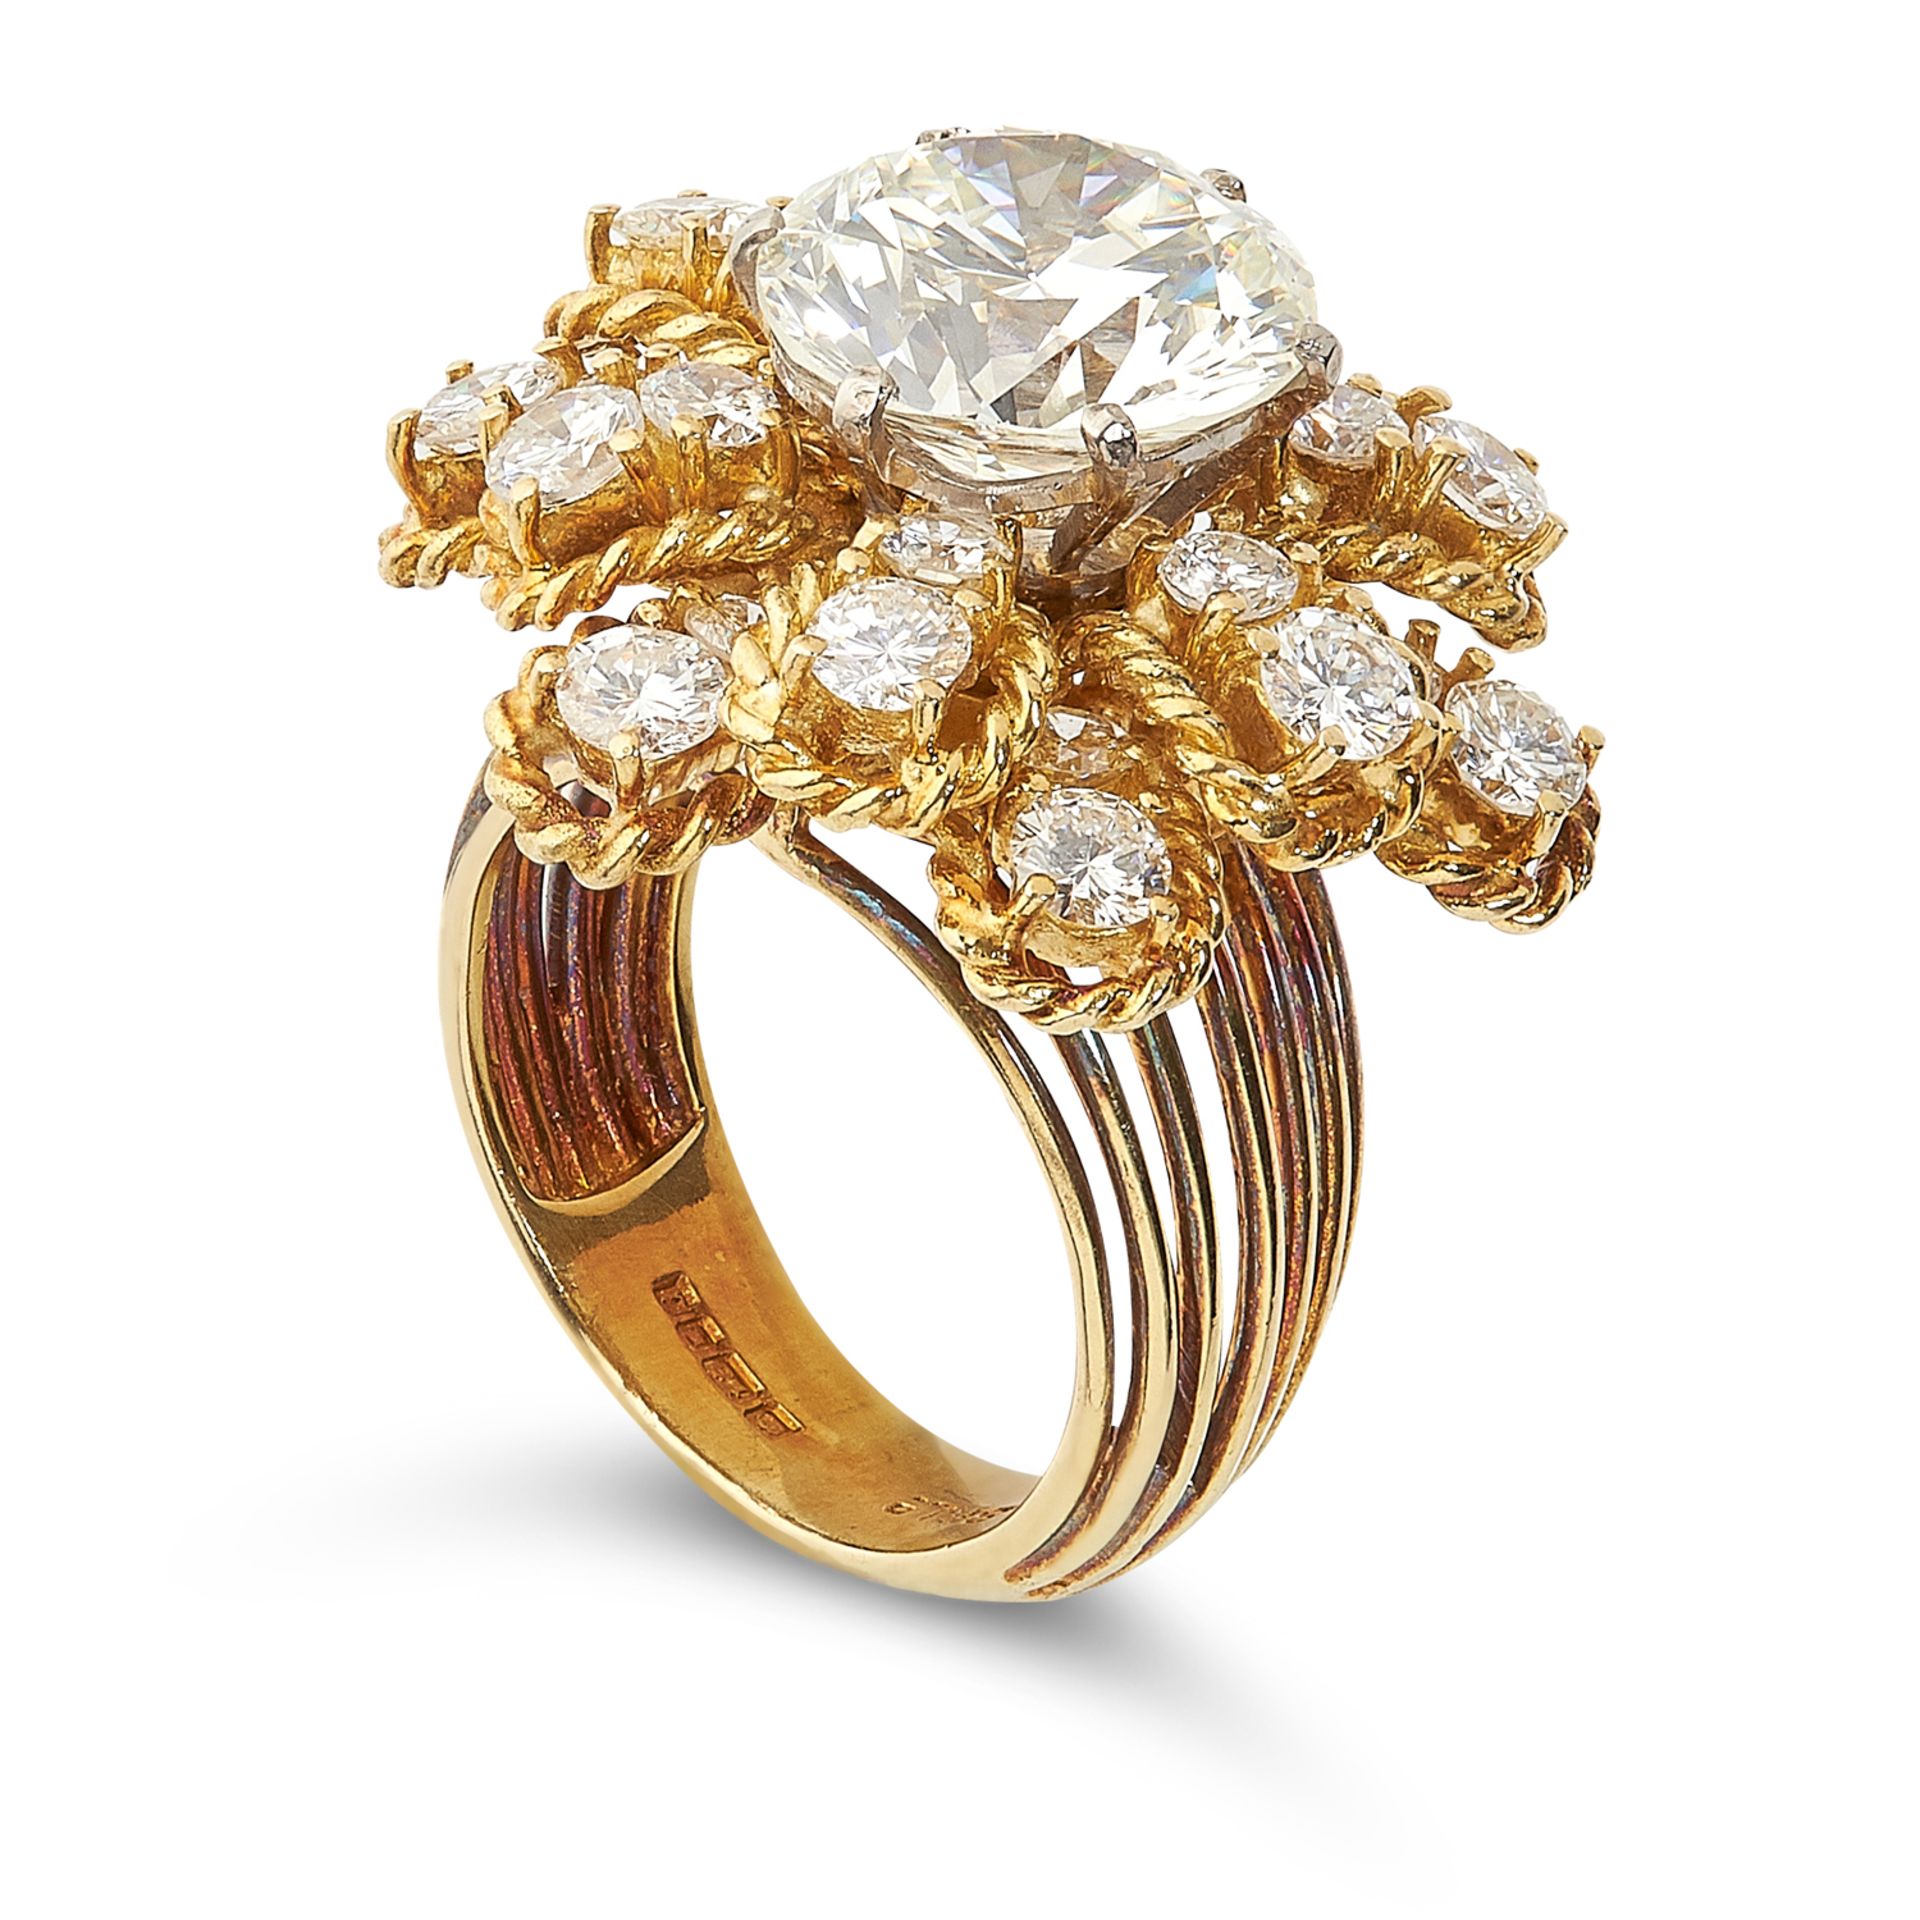 A VINTAGE 4.76 CARAT DIAMOND RING, BEN ROSENFELD 1964 in 18ct yellow gold, set with a central - Bild 4 aus 4